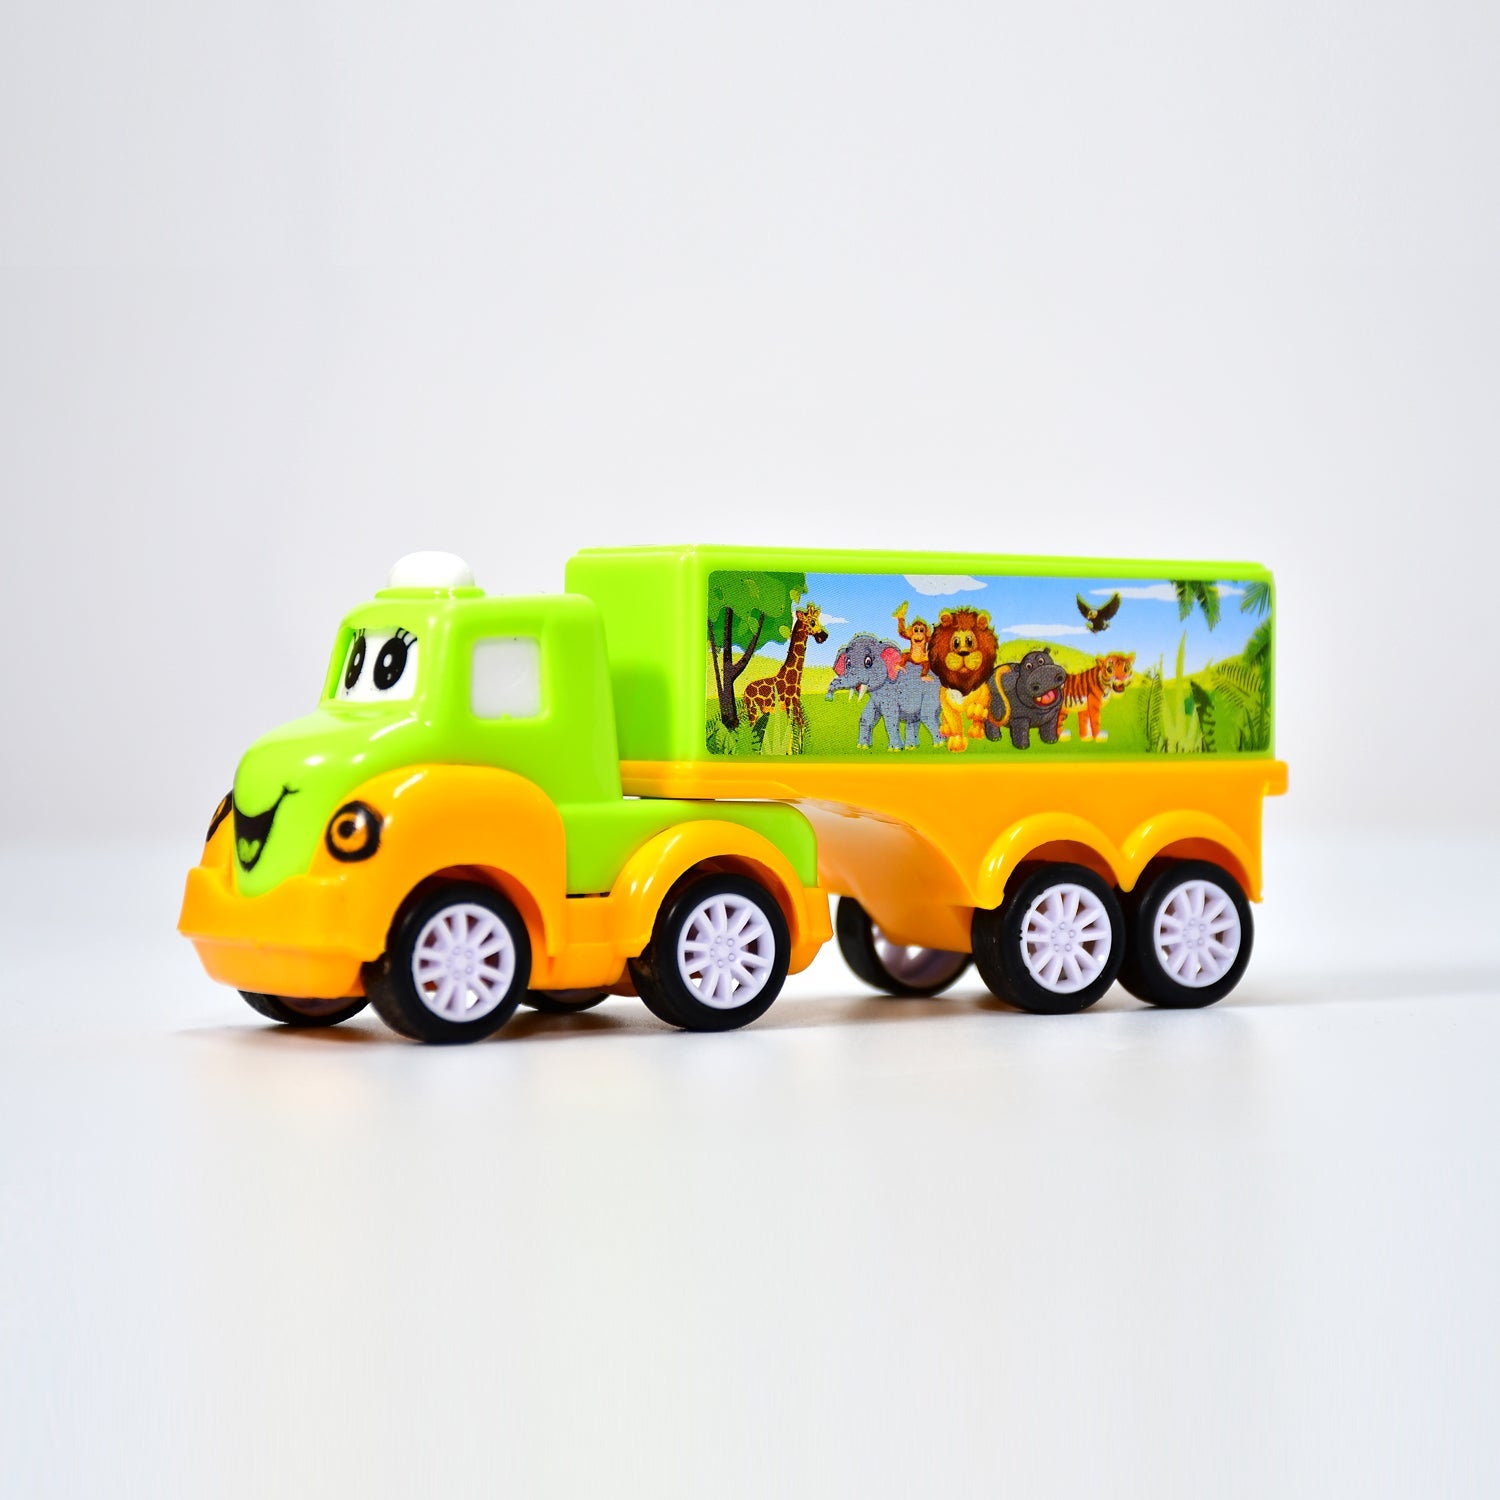 8052 Small Green and yellow Toy Truck. 